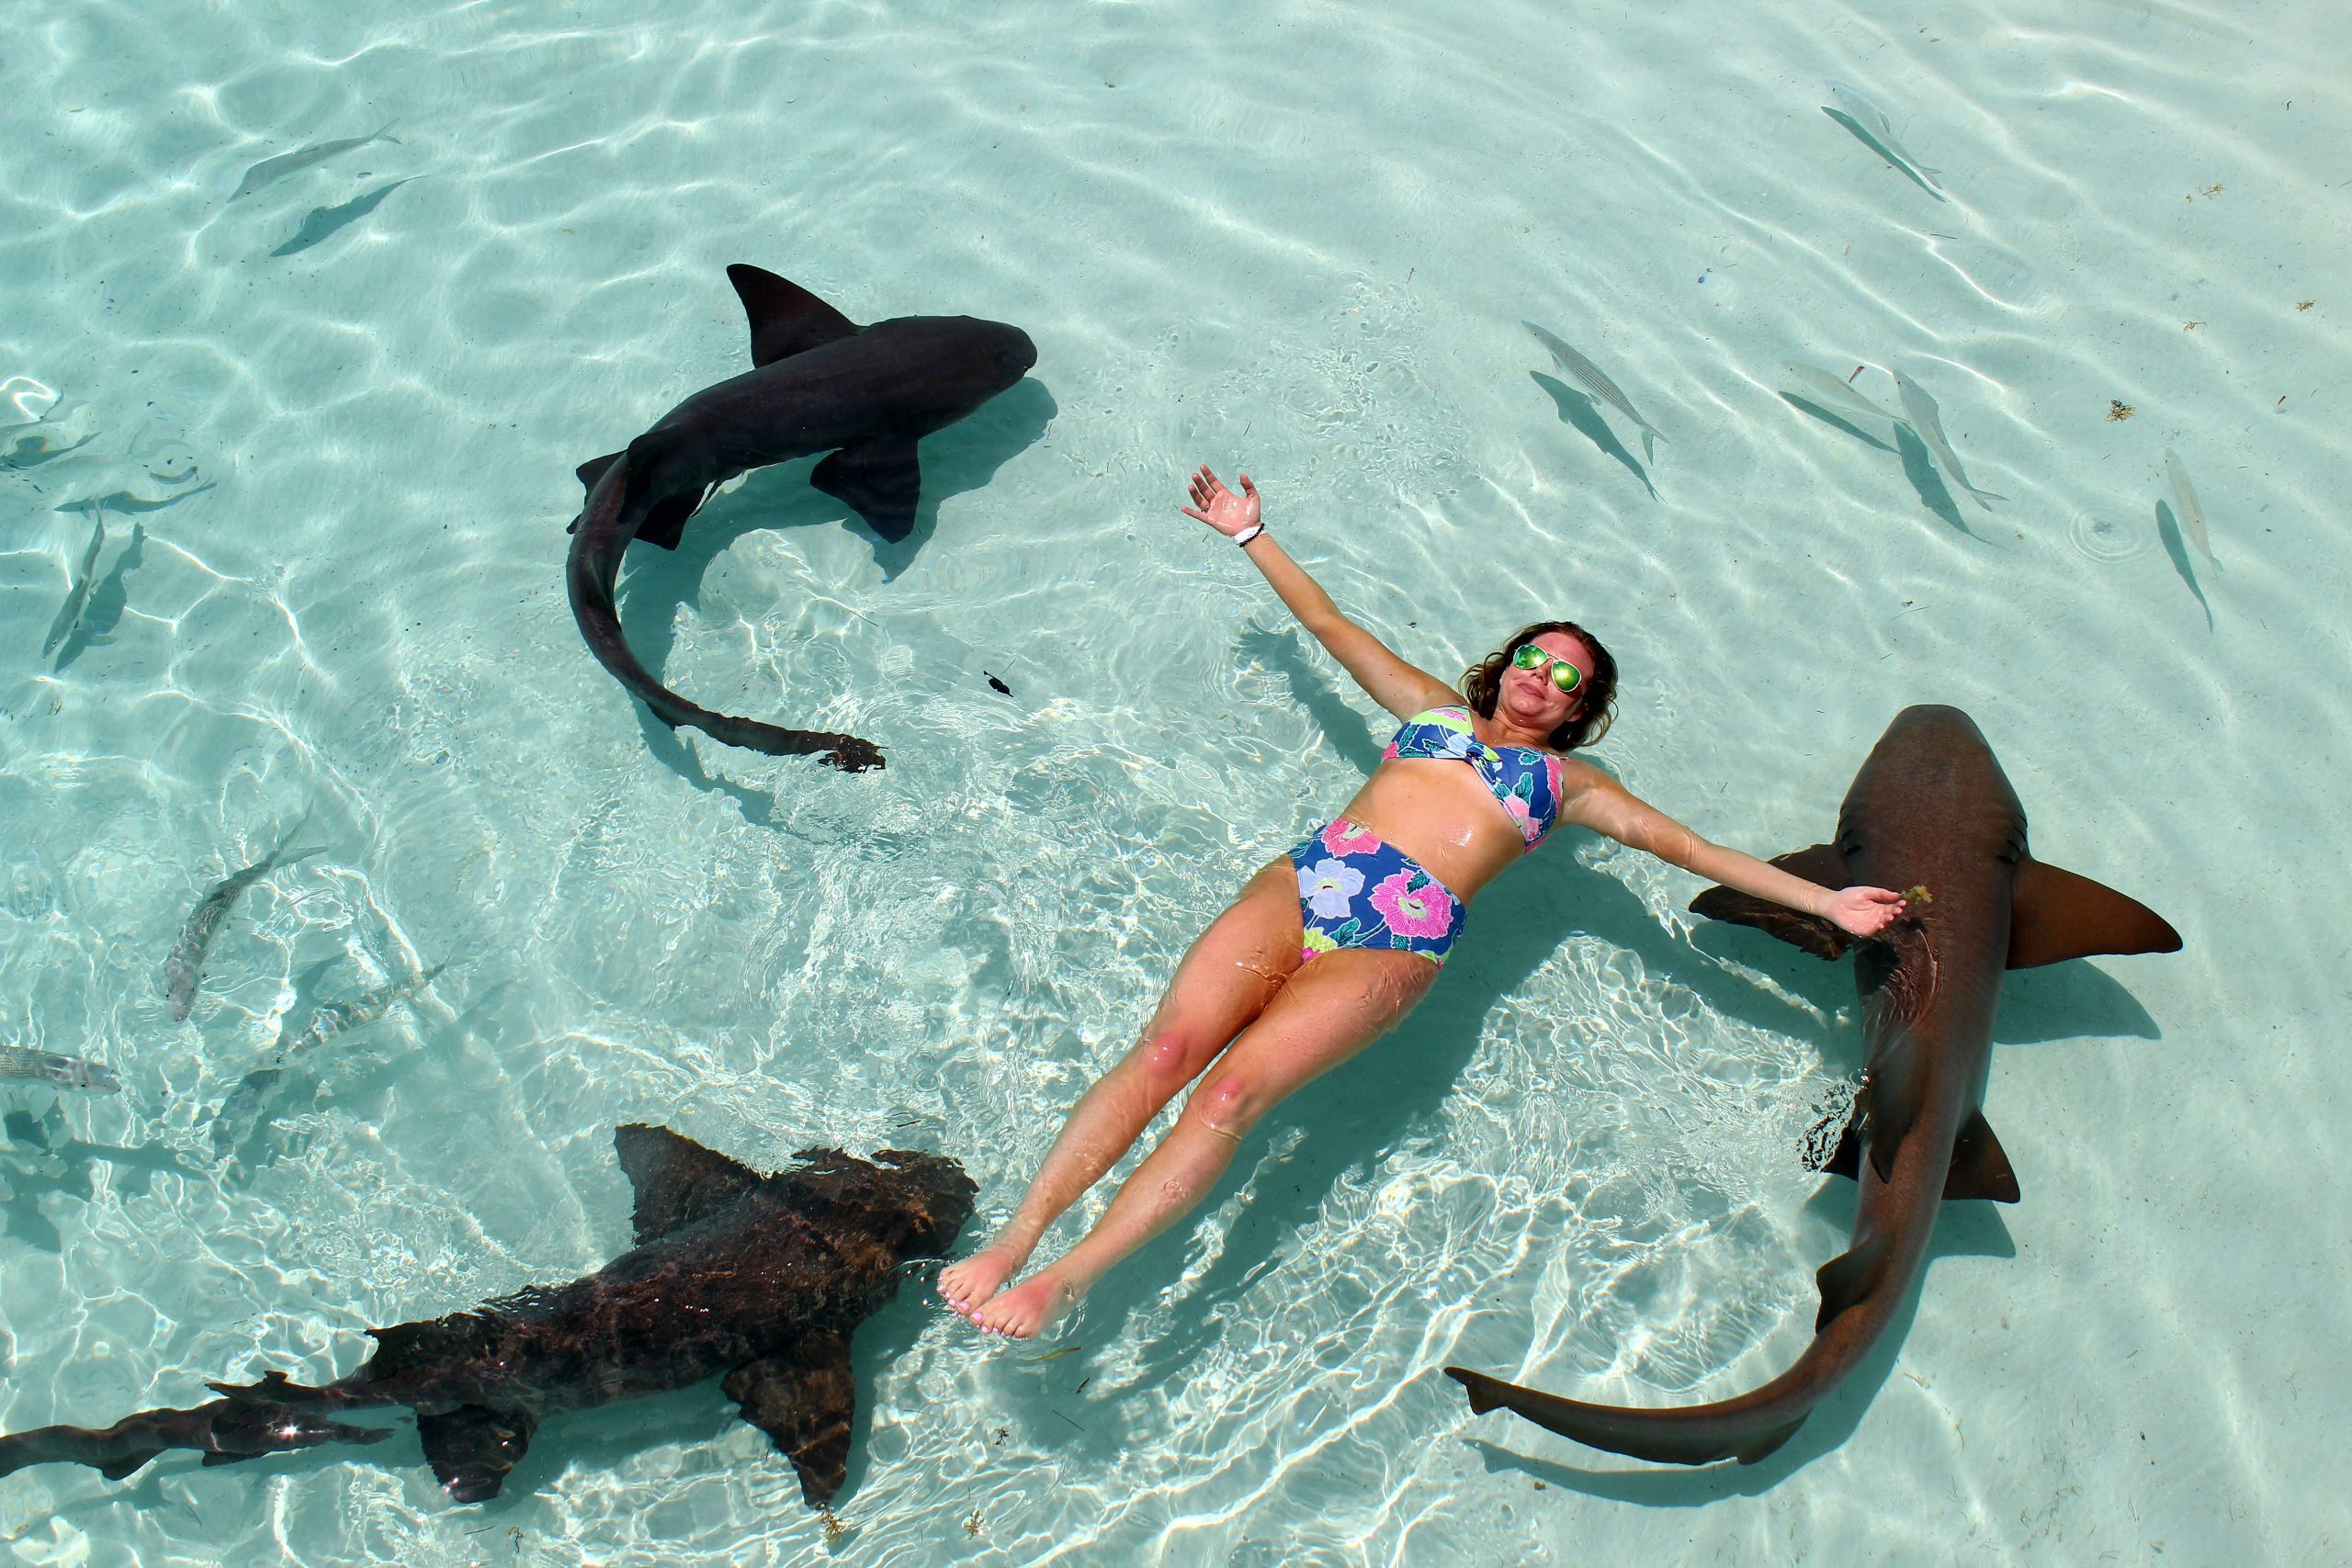 SWim with the sharks